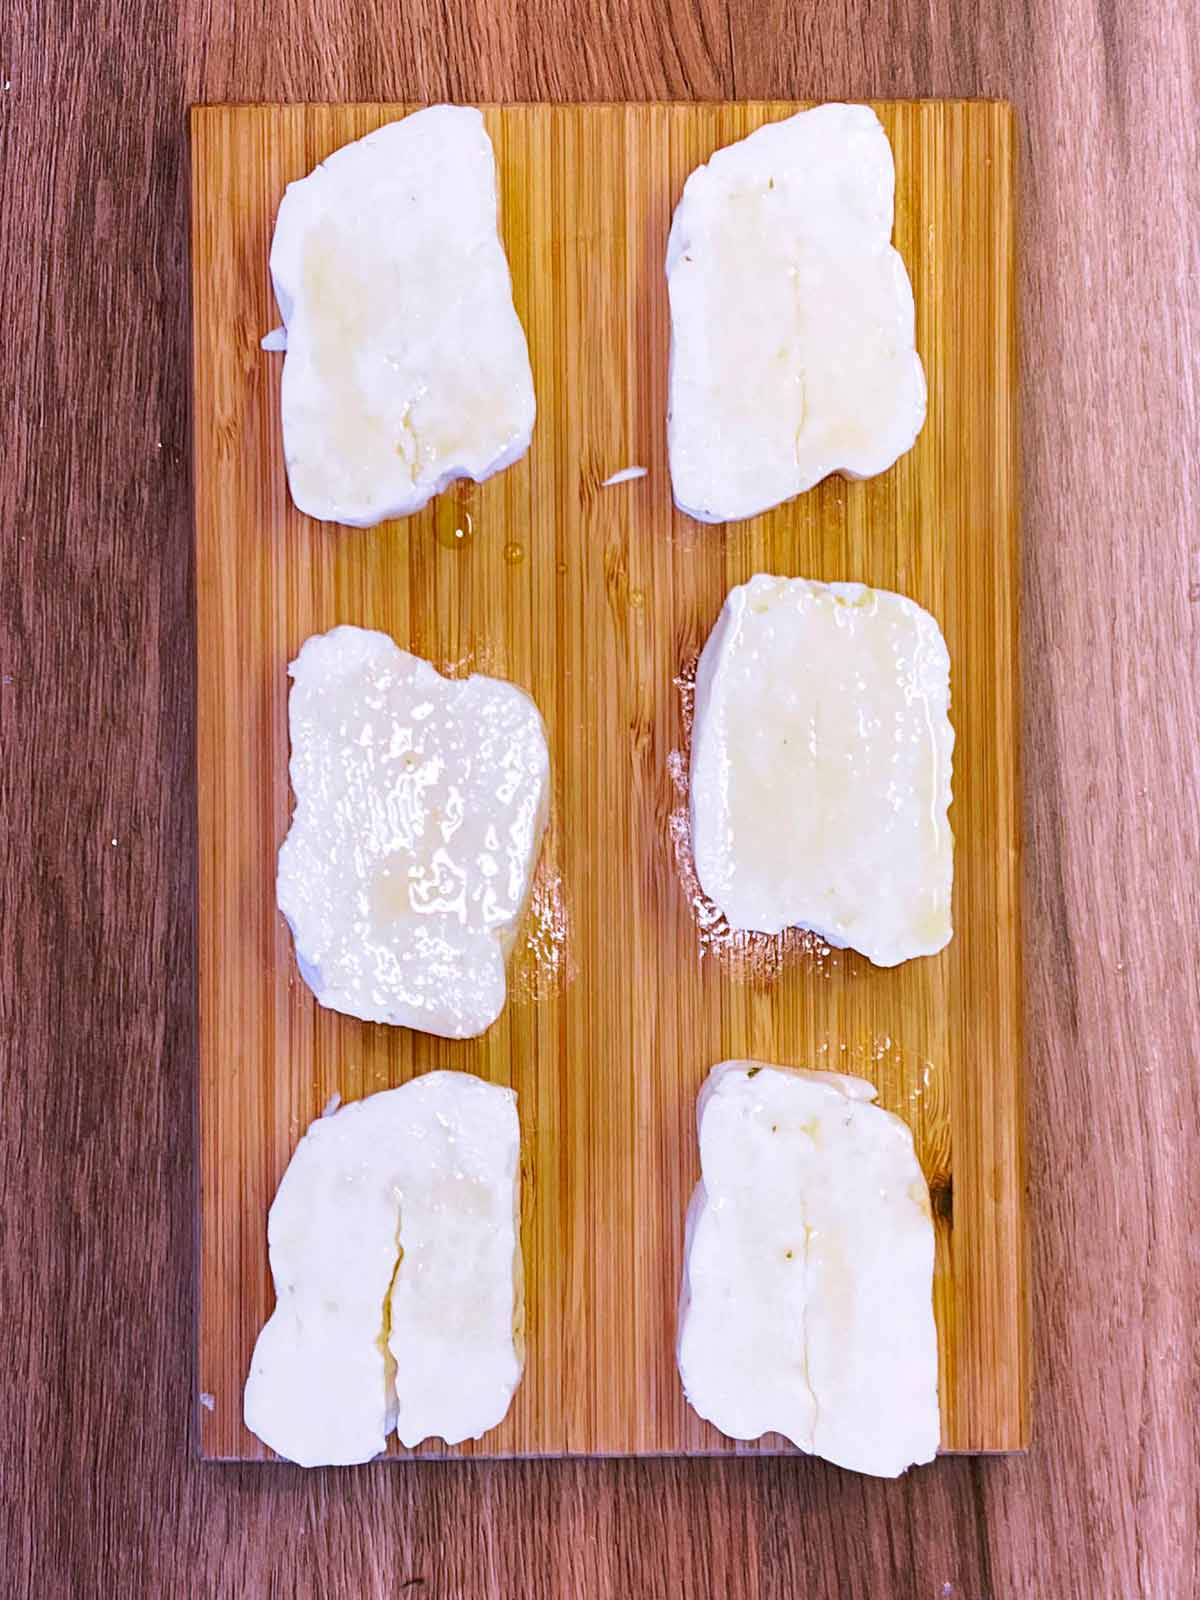 Oil brushed onto the halloumi slices.